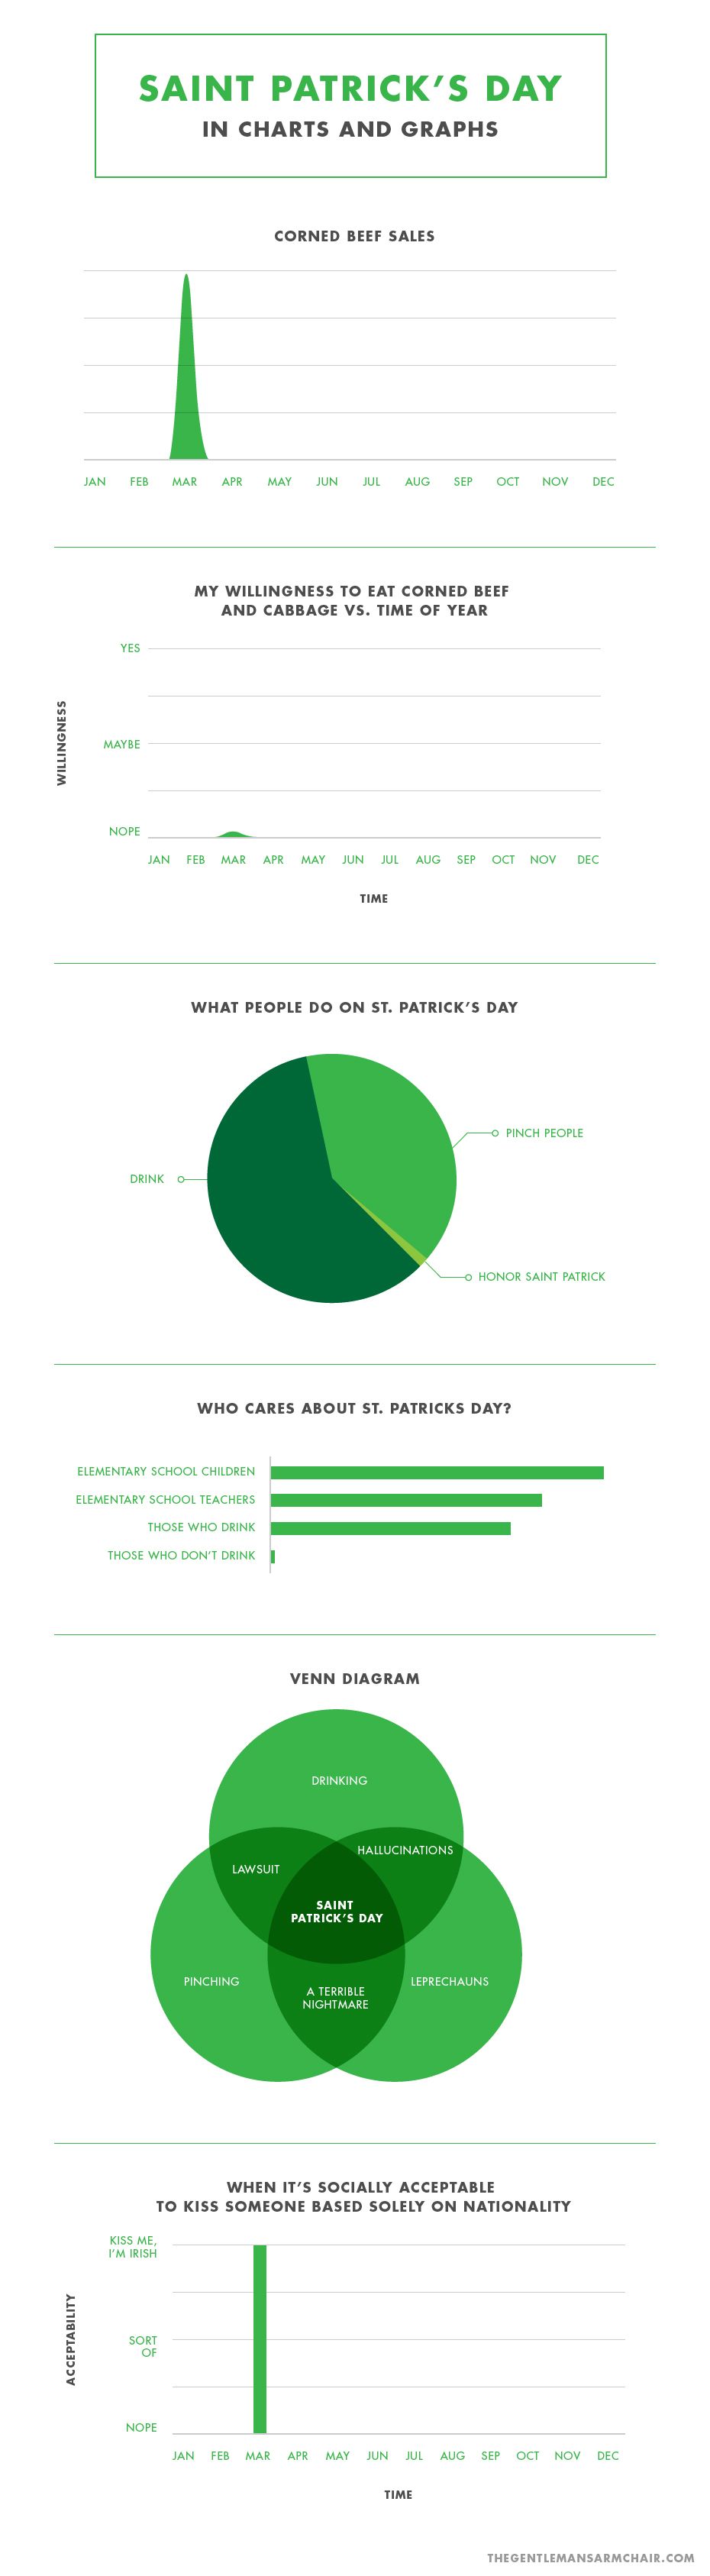 Saint Patrick's Day in charts and graphs